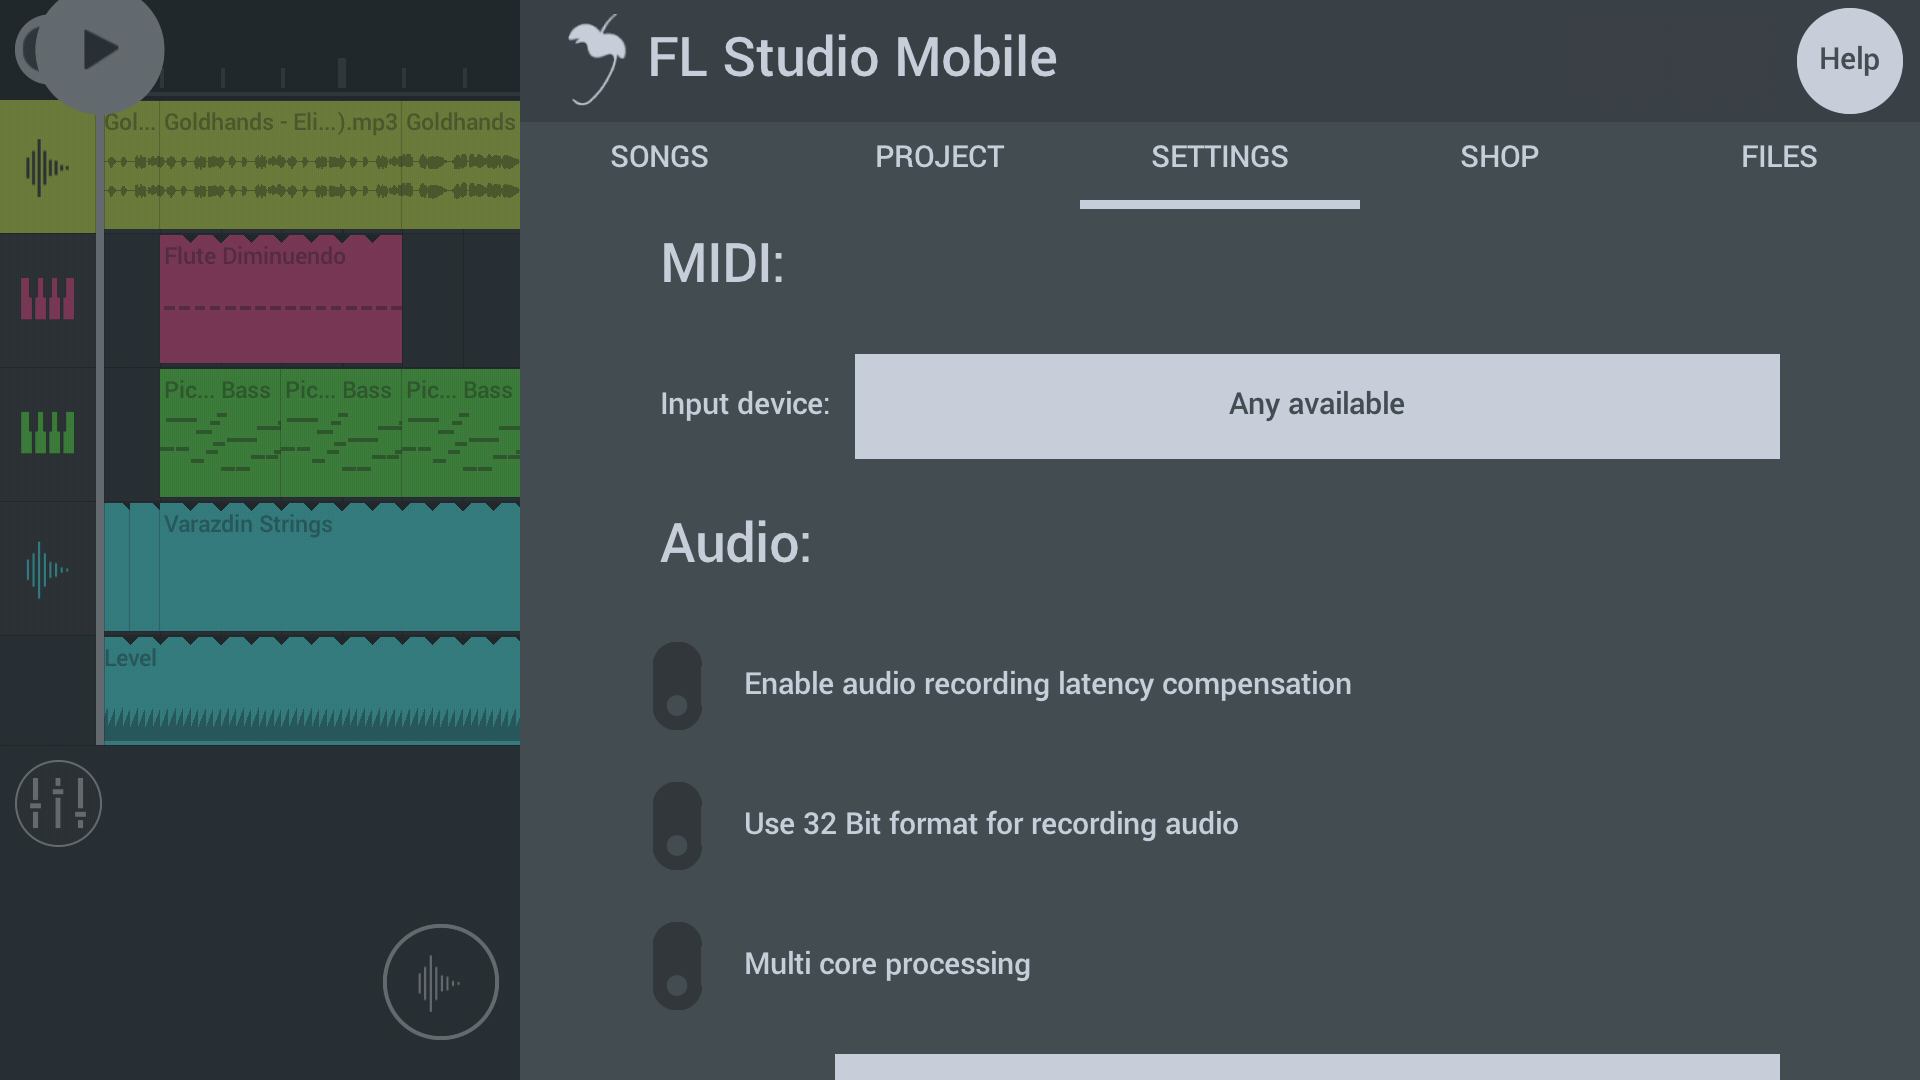 FL Studio mobile tutorial and demo - is this useful for hardware